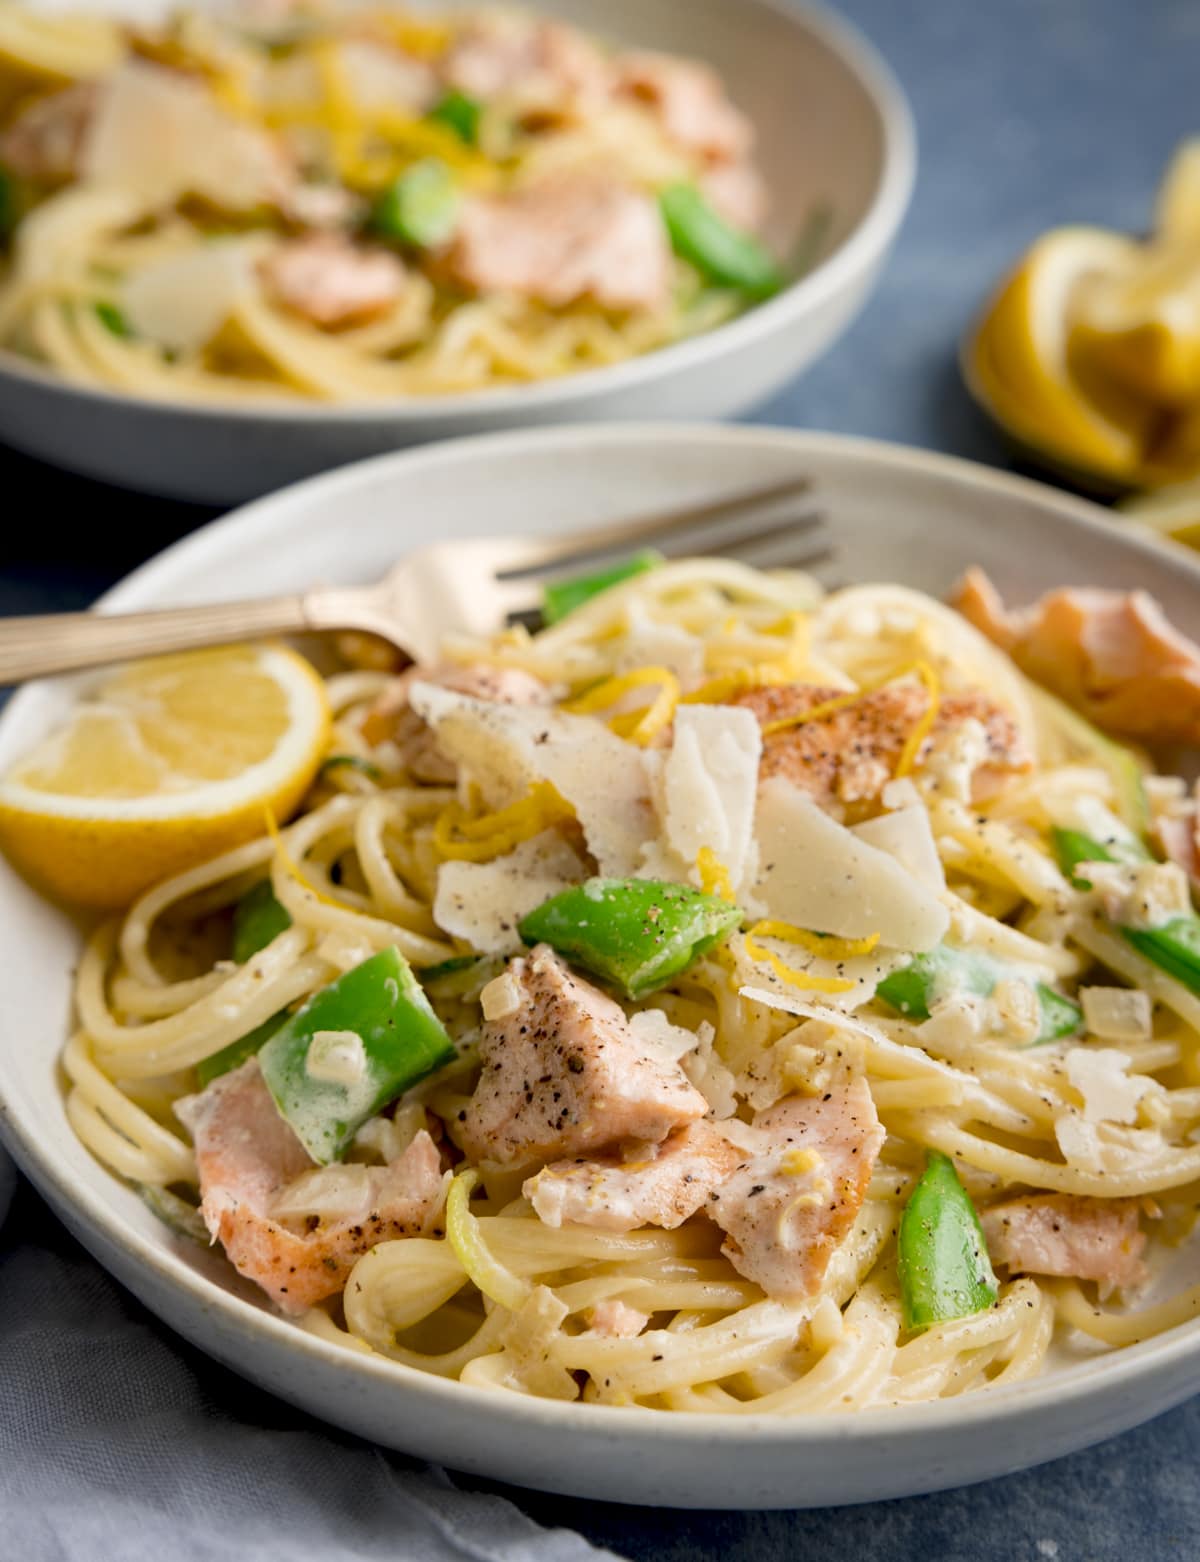 Side on image of salmon and spaghetti in a creamy lemon sauce in a white bowl with a lemon wedge in the bowl. The bowl is on a blue background. There is a further bowl of pasta, a napkin and some lemon wedges nearby.